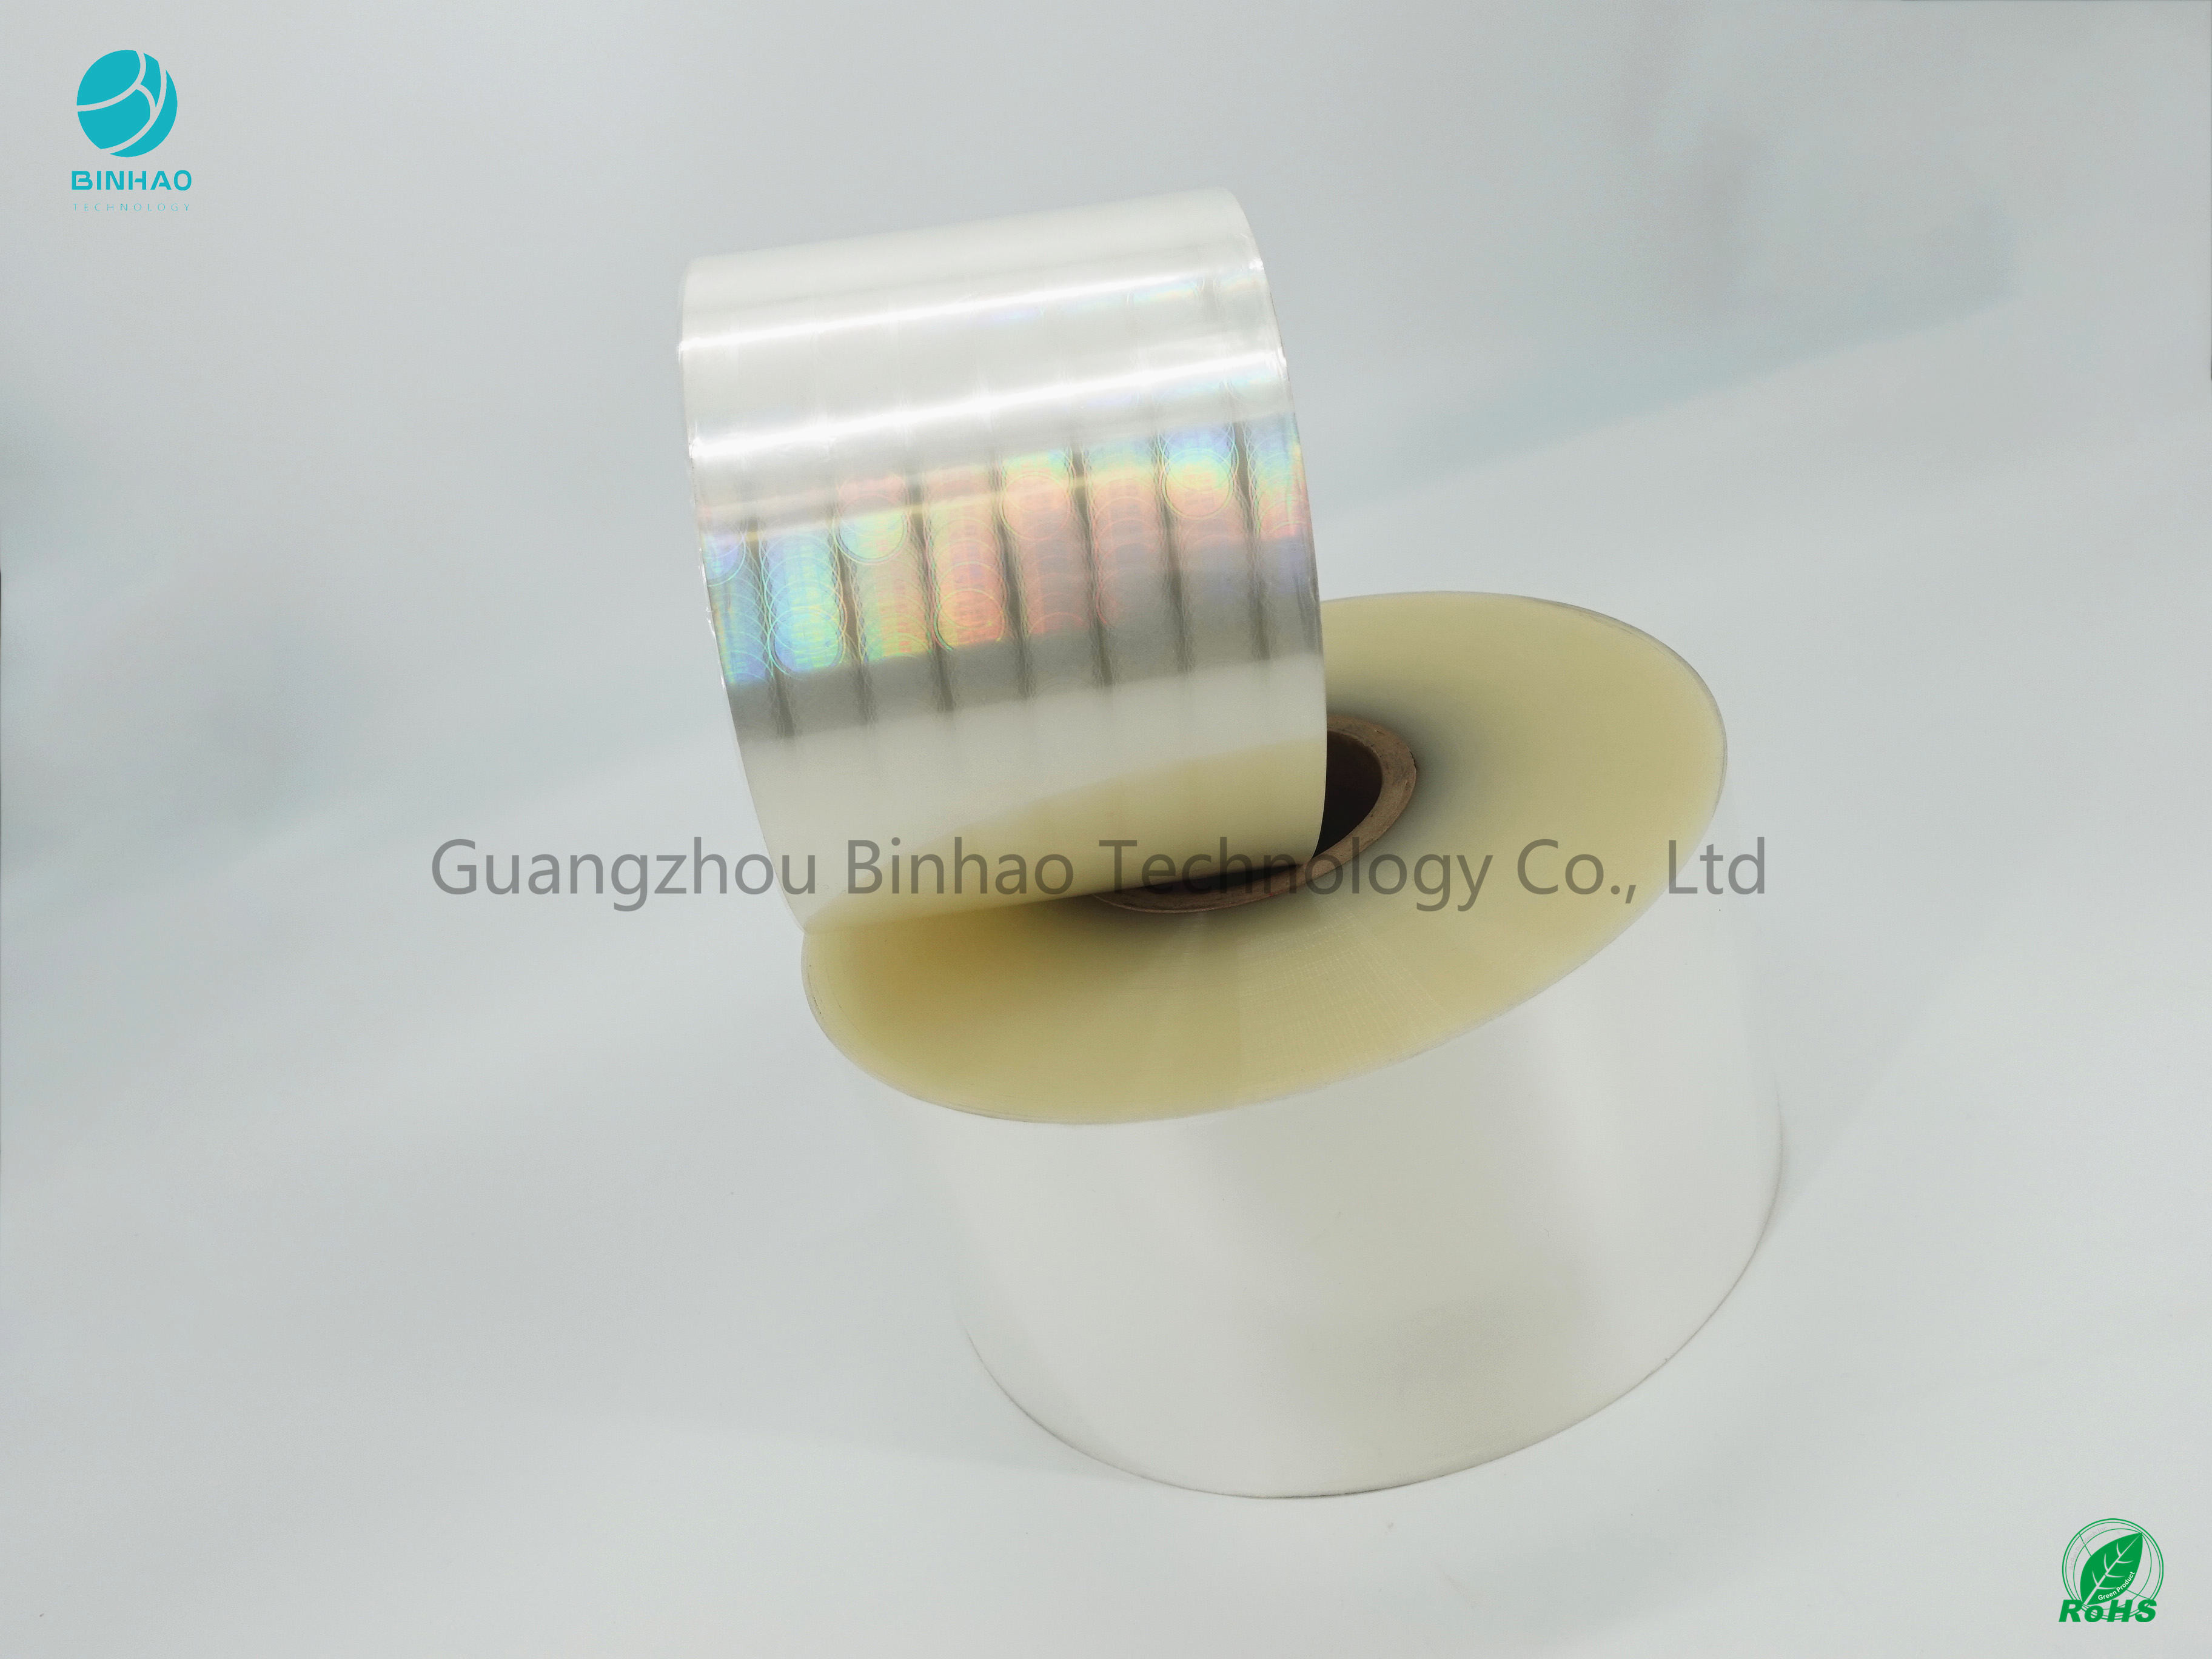 No Bubble Packing Film For King Size Cigarette BOPP Film 120mm